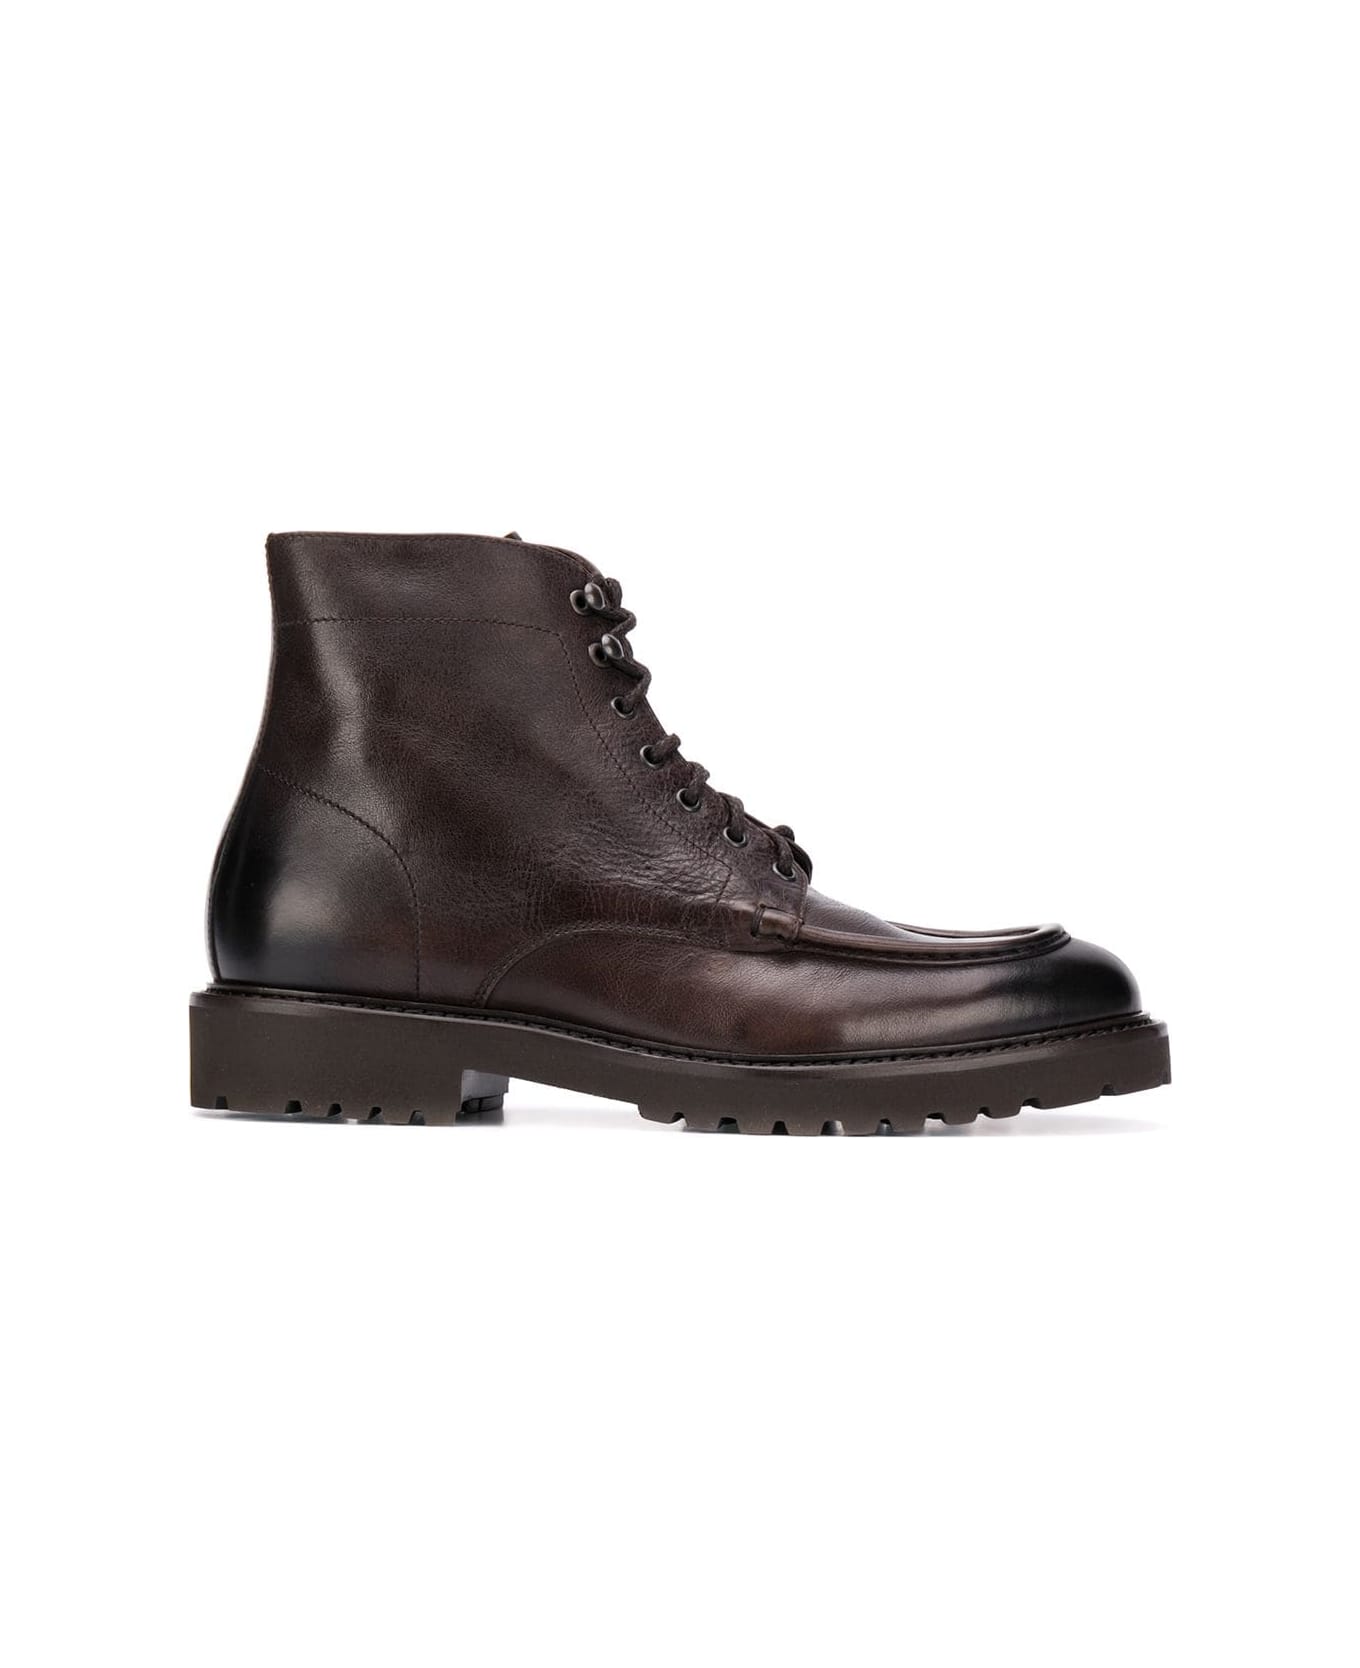 Doucal's Triumph Broadside Derby Boots - Brown